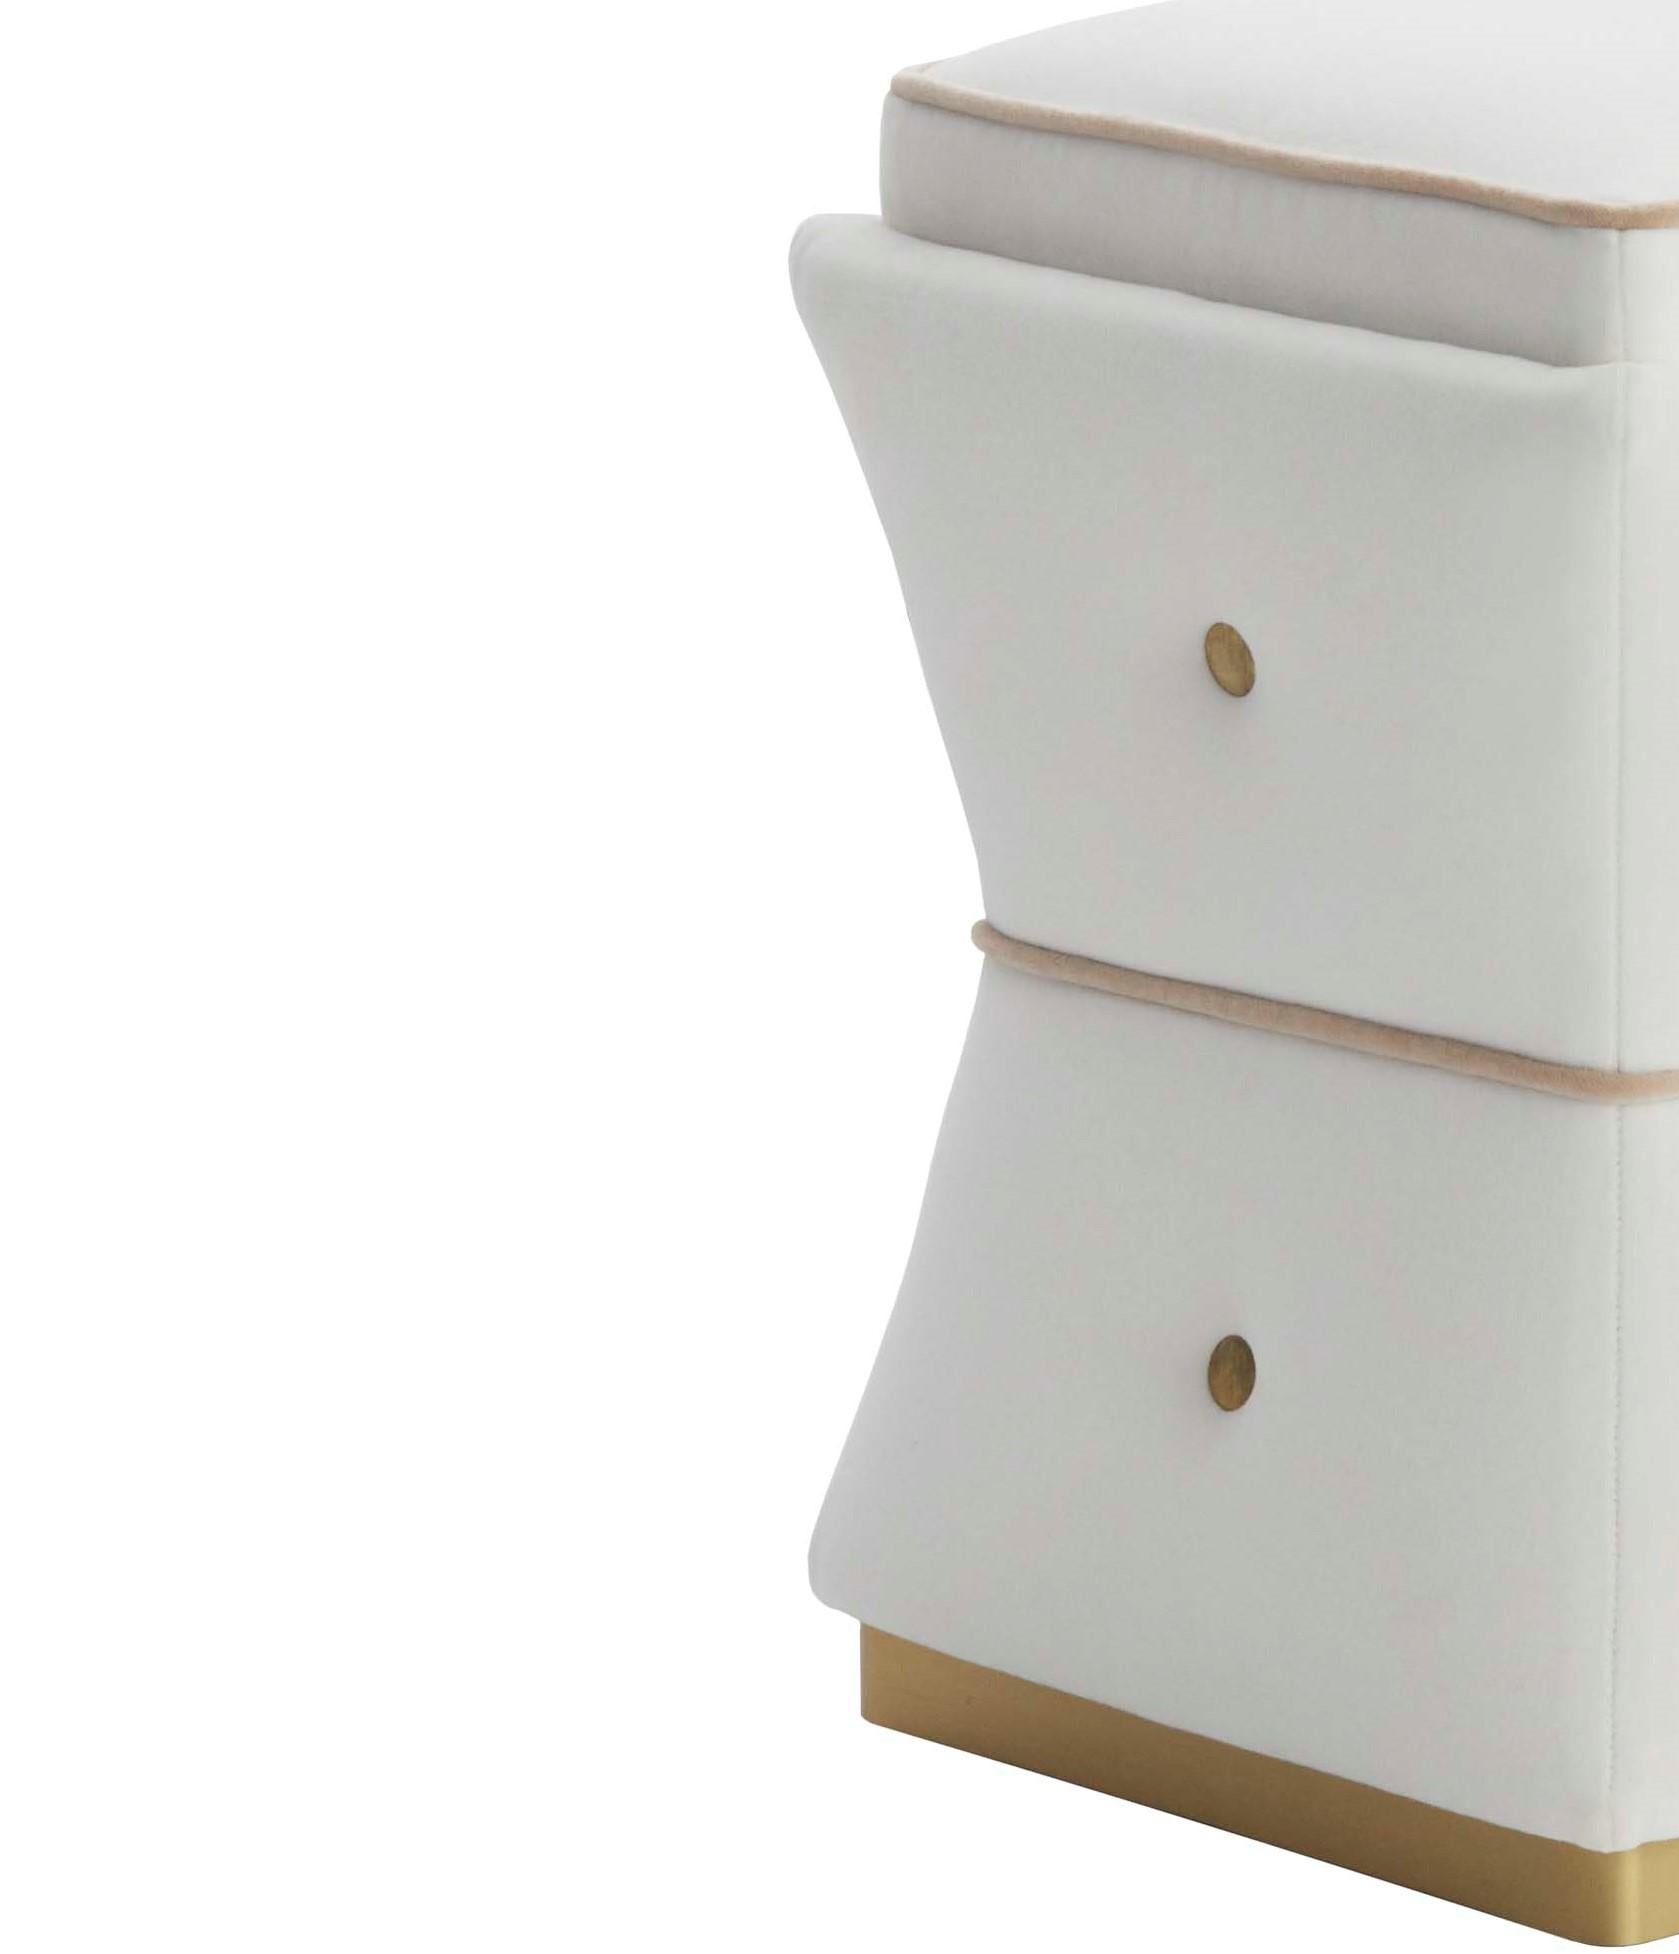 A sophisticated stool with buttons and plinth in brushed brass.

Upholstered with white Siège 886 (structure) and beige safety velvet 17 (piping), combined with brushed brass plinth and buttons.